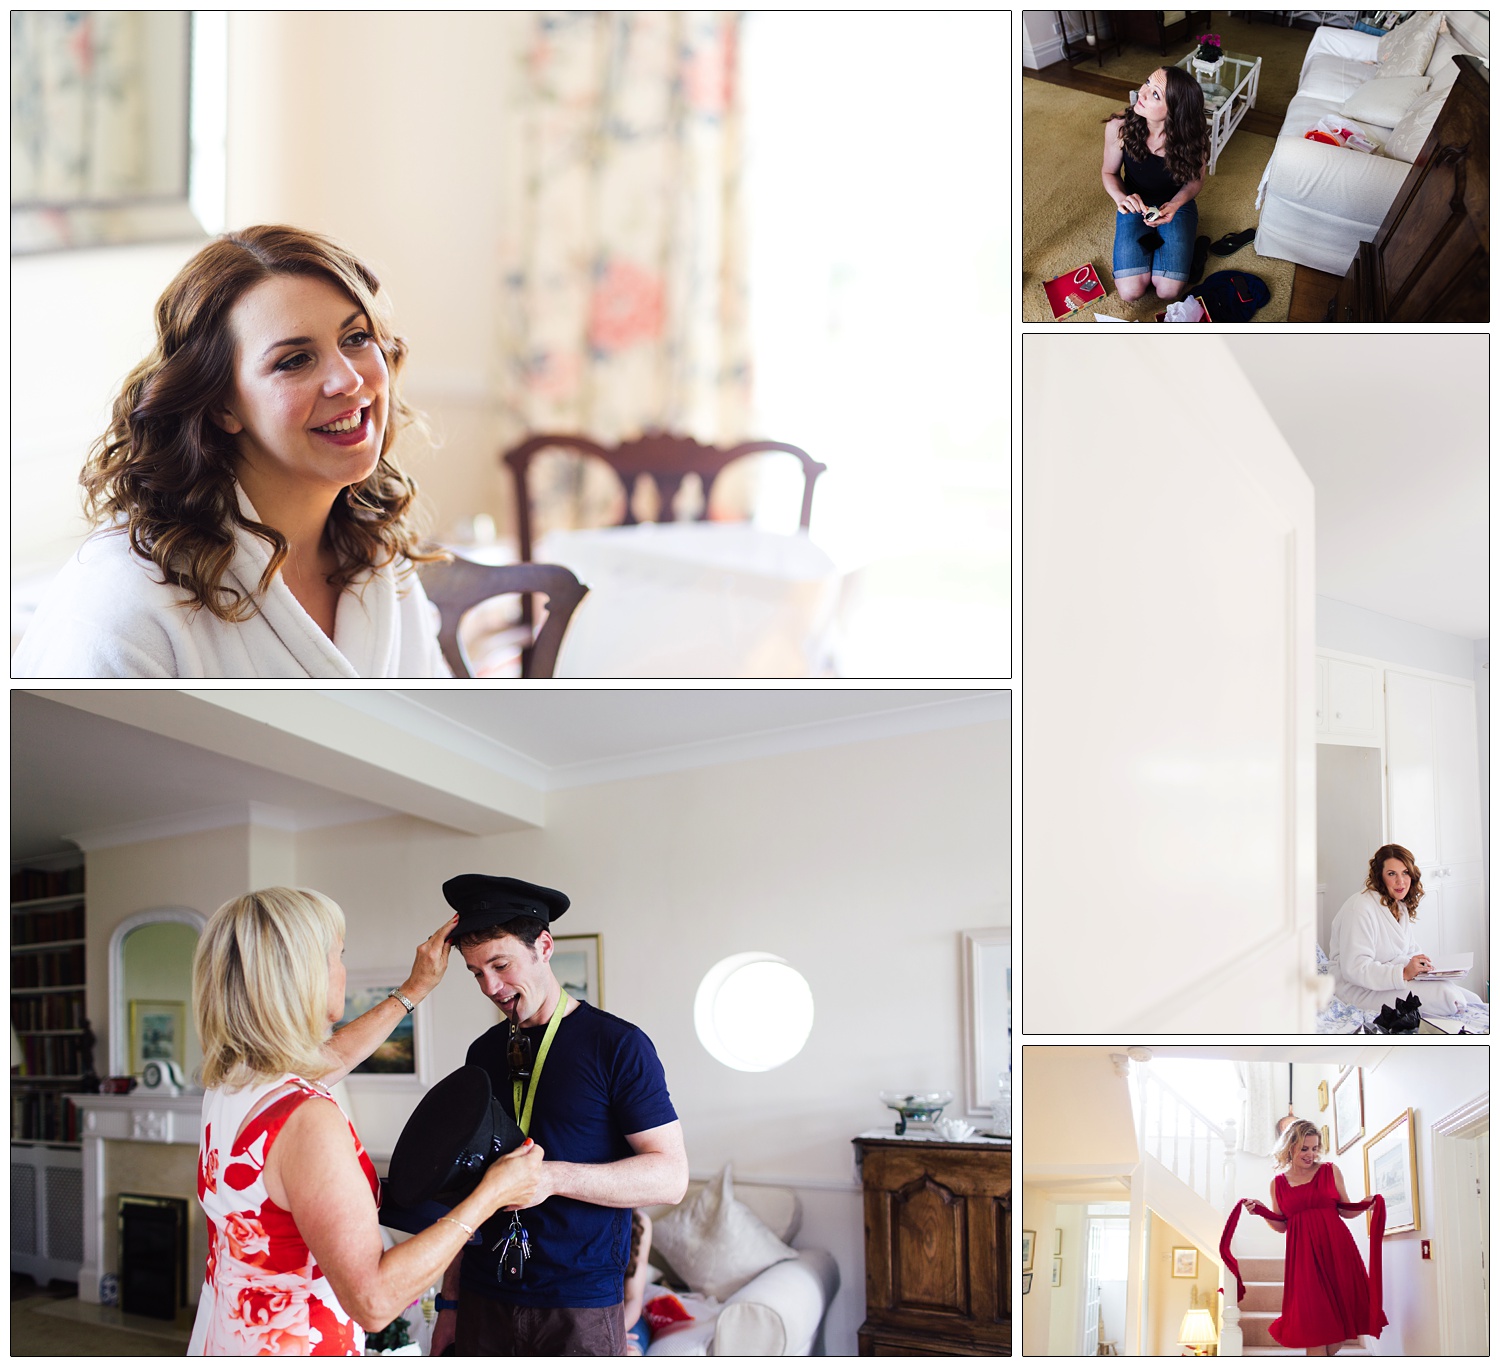 Moments from the bridal preparation taking place at the family home.